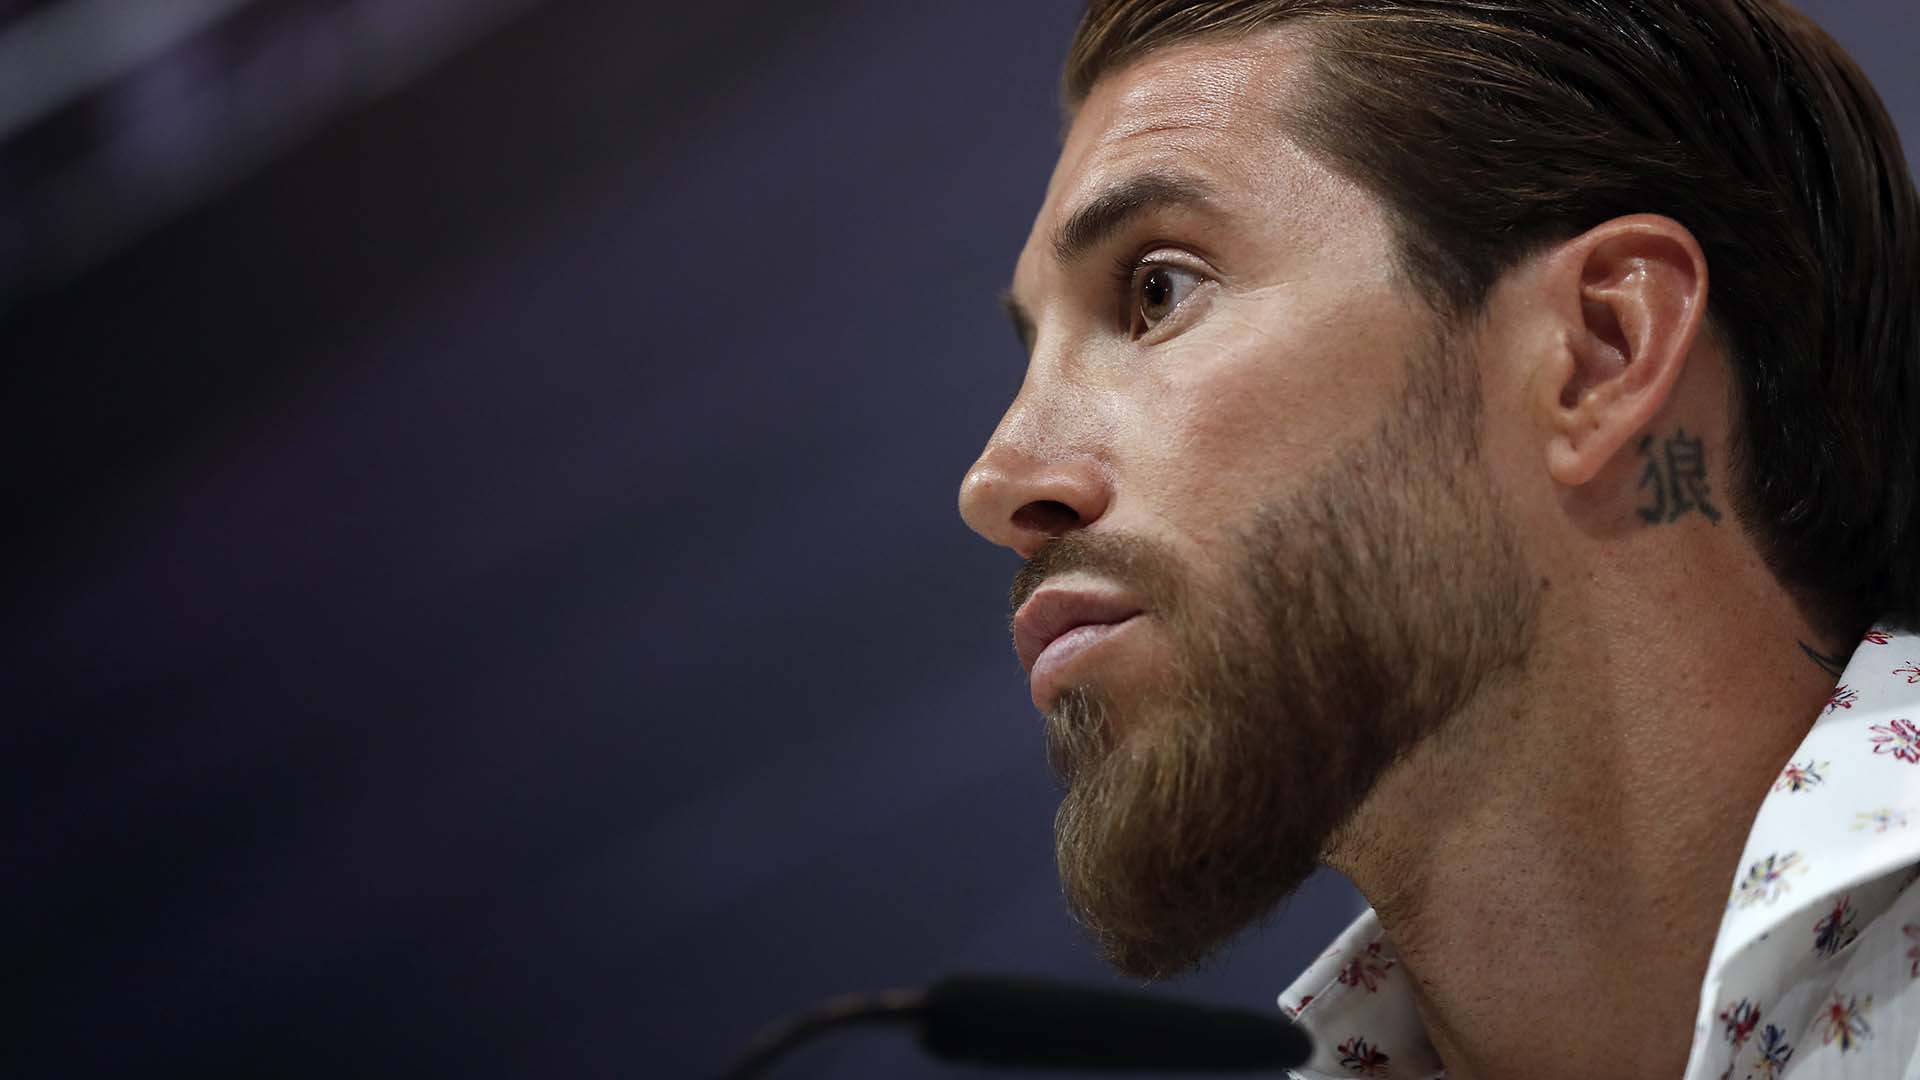 Soccerplayer Sergio Ramos during a pressconference in Madrid on Thursday 30 May 2019.